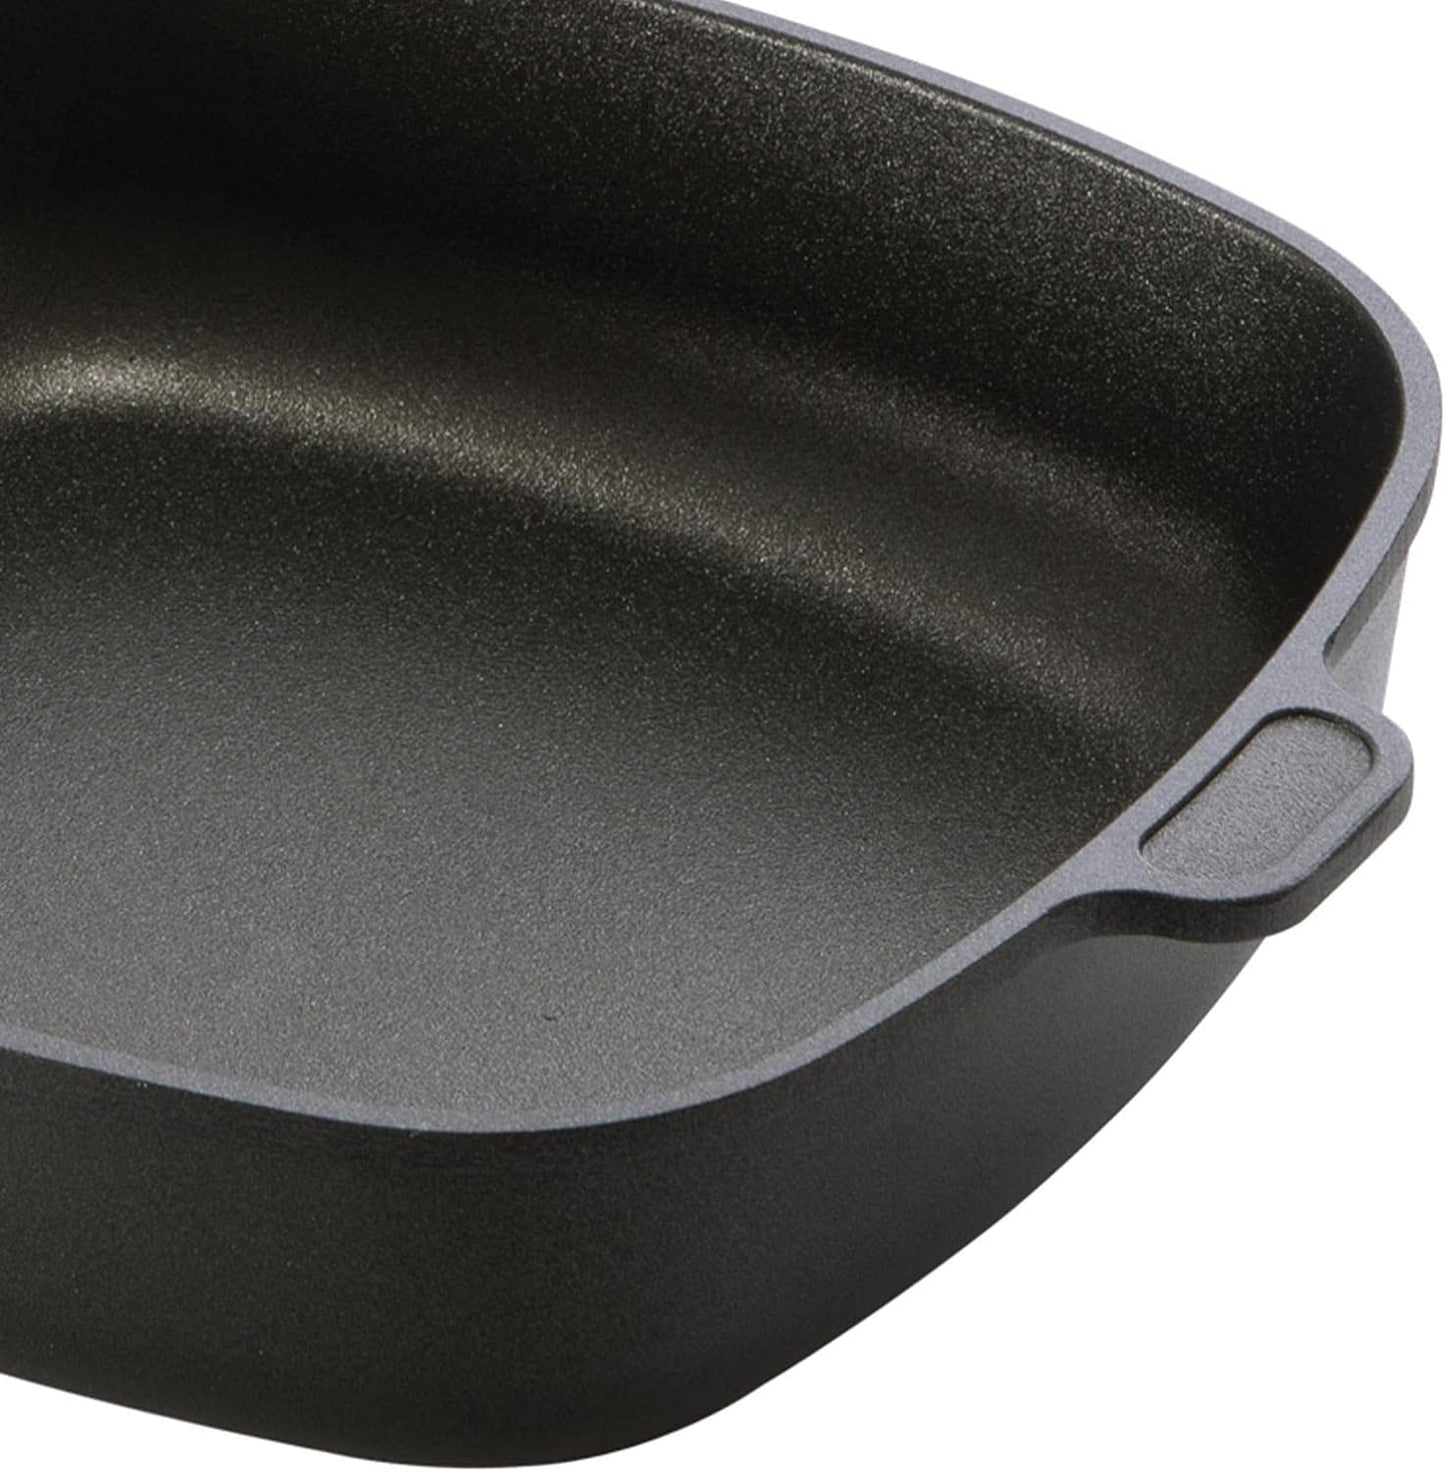 Eurolux premium square braising pan, Induction friendly, Removable Handle, Made in Germany